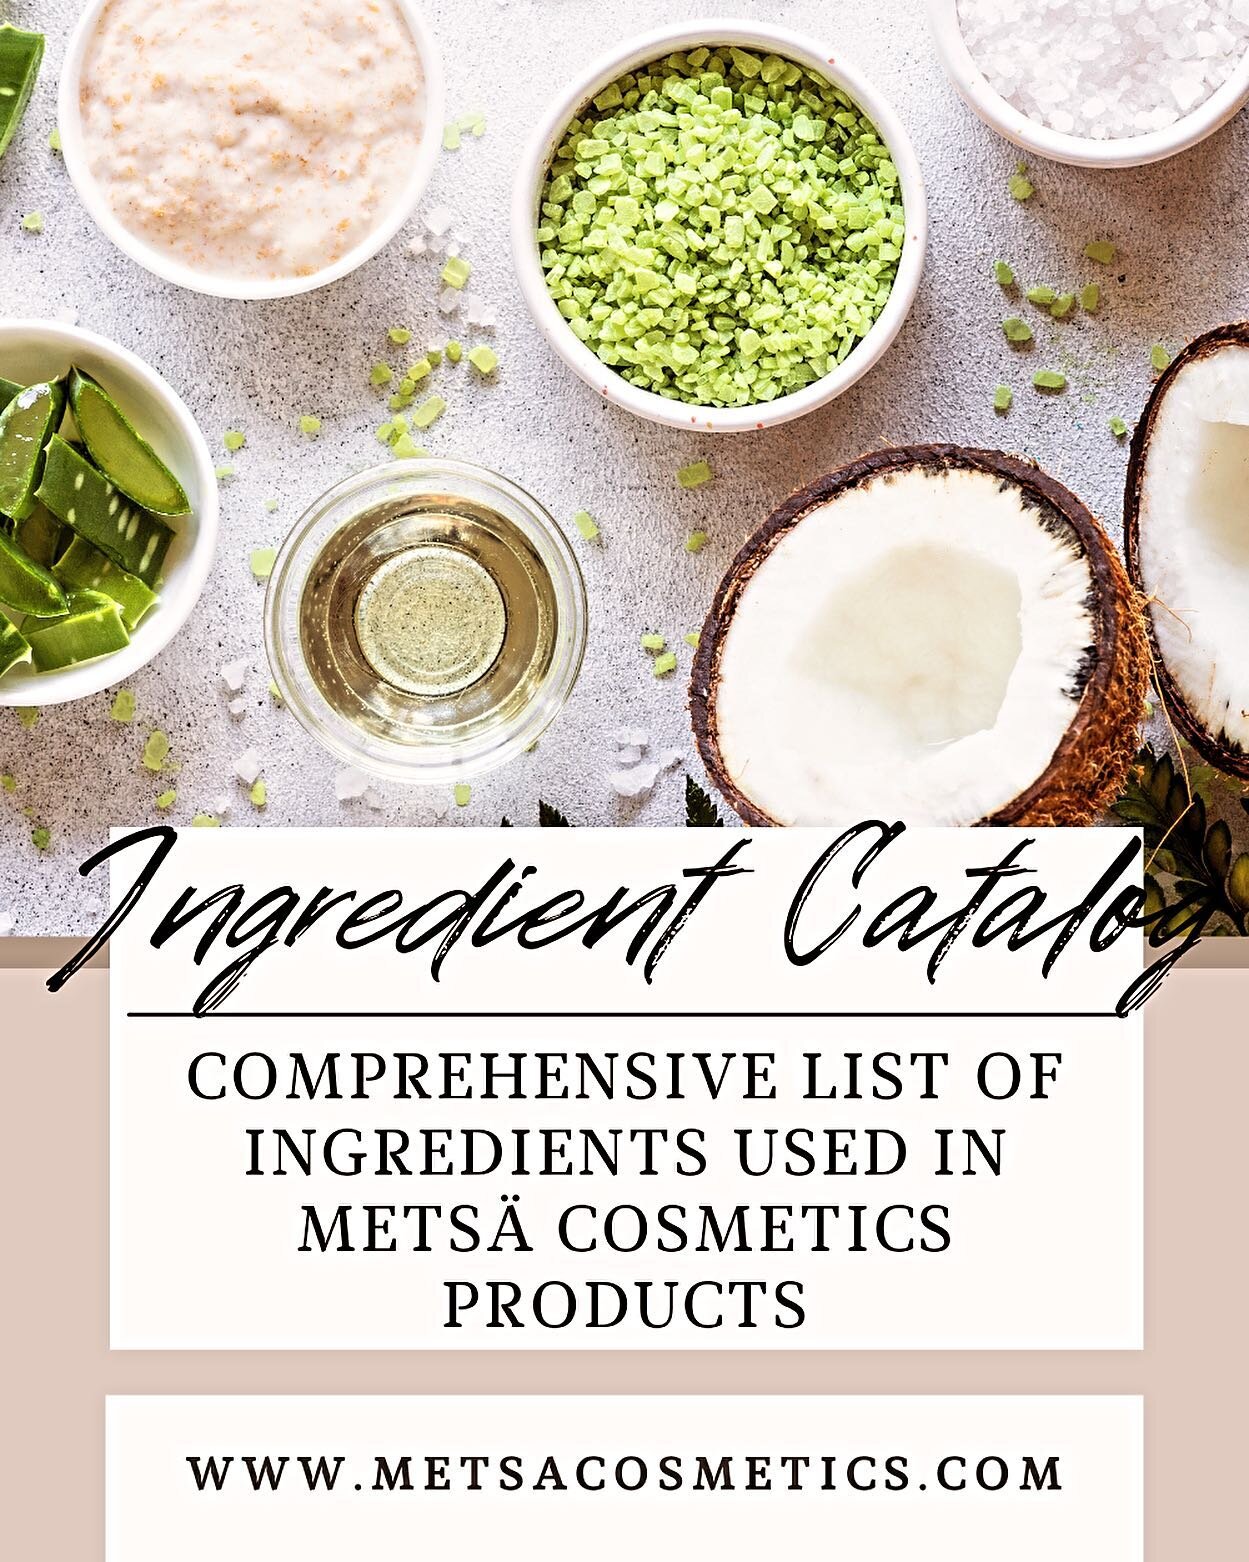 Wanna know what&rsquo;s in your products? Mets&auml; makes it simple - hit the link in our bio ✨🌿
#skincareroutine #selfcare #vegan #cleanbeauty #skincare #beauty #selfcare #antiaging #glowingskin #healthyskin #naturalskincare #vegan #wellness #skin